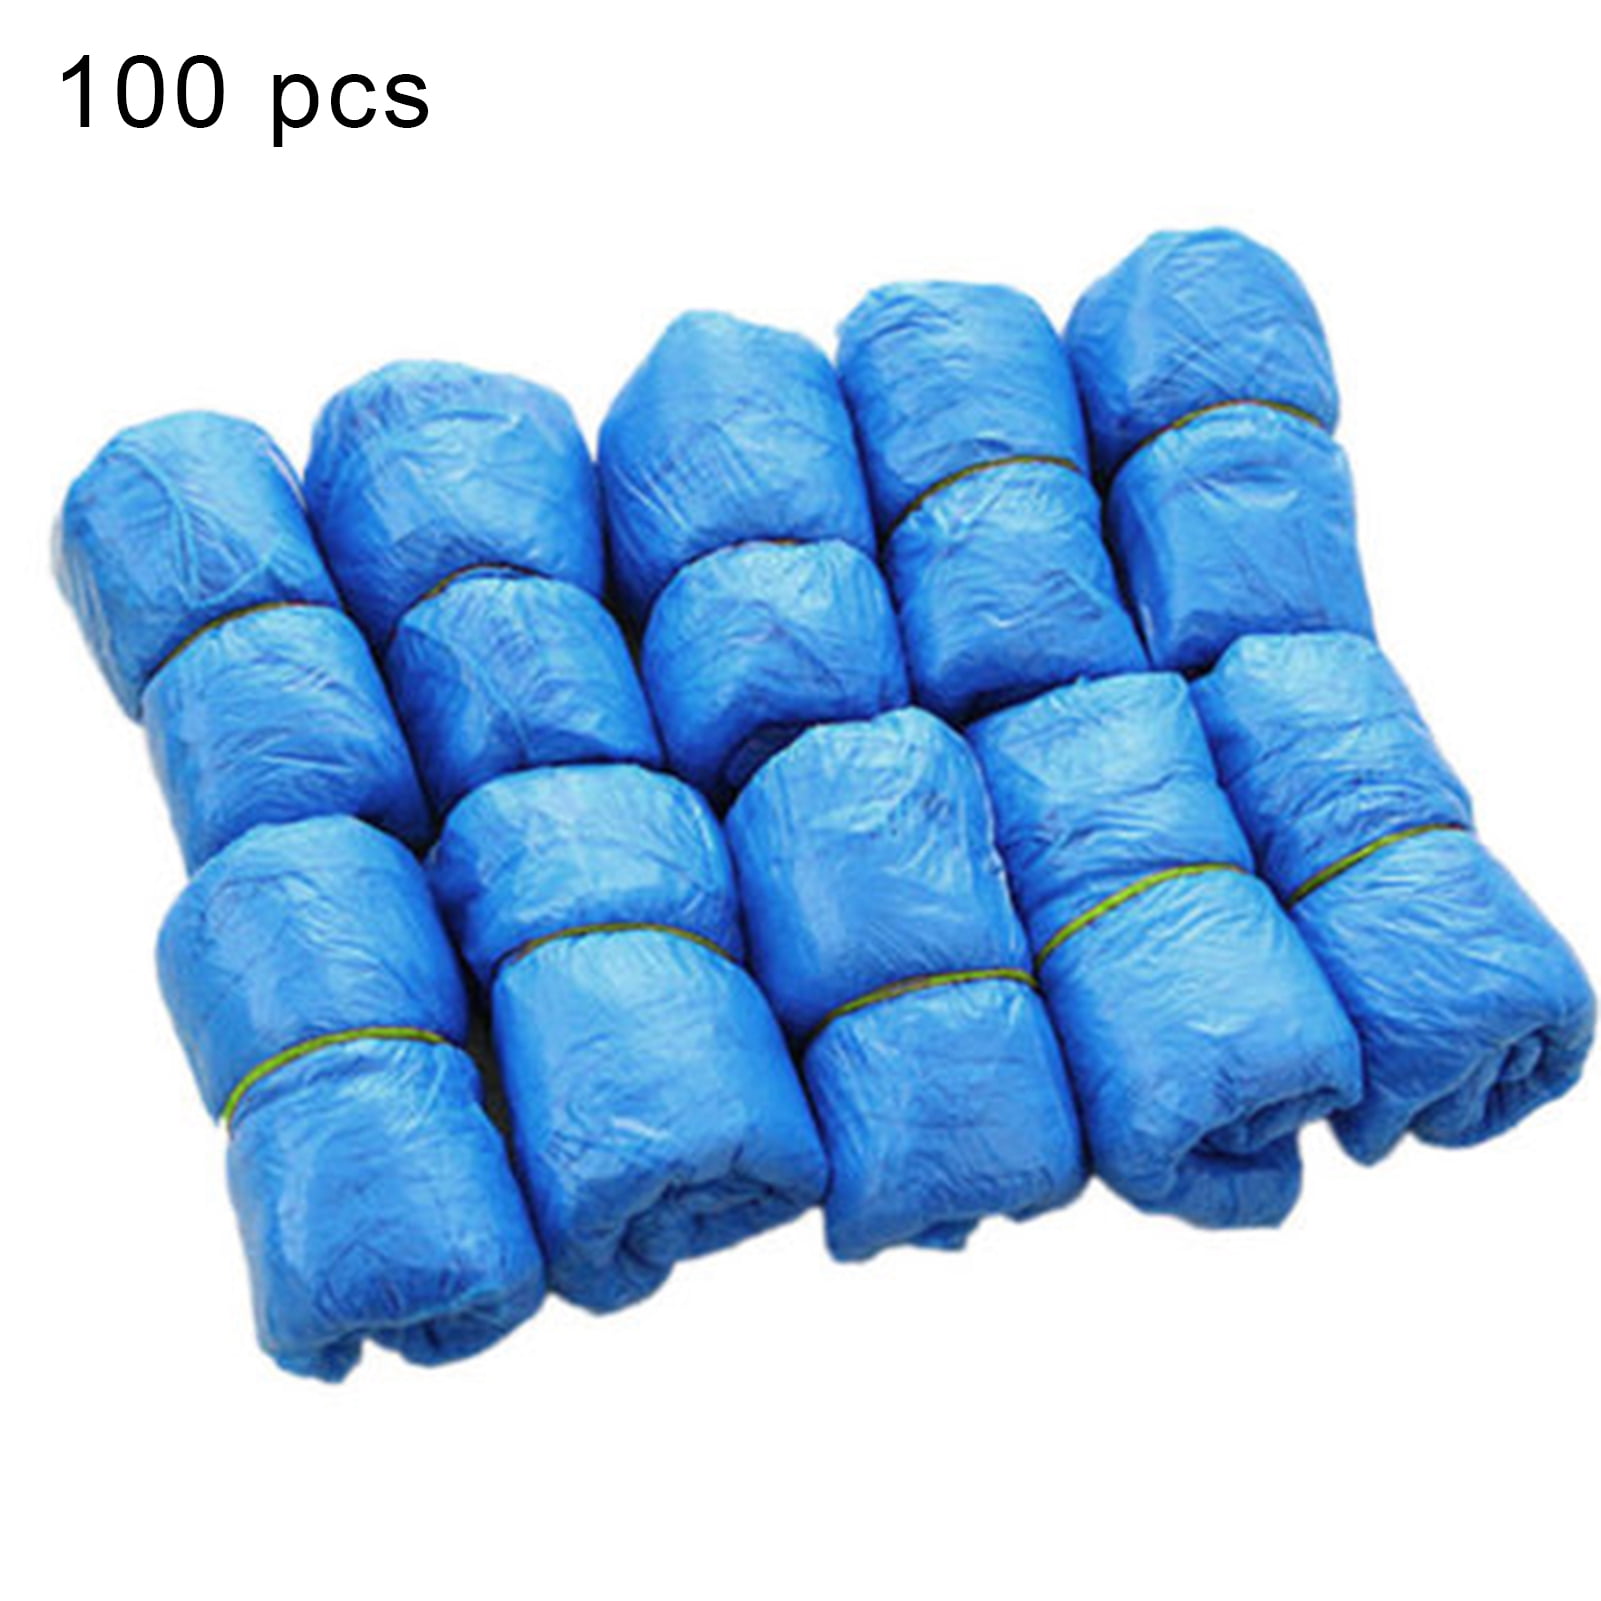 100Pcs Disposable Plastic Anti Slip Shoe Covers Cleaning Overshoes Protective 